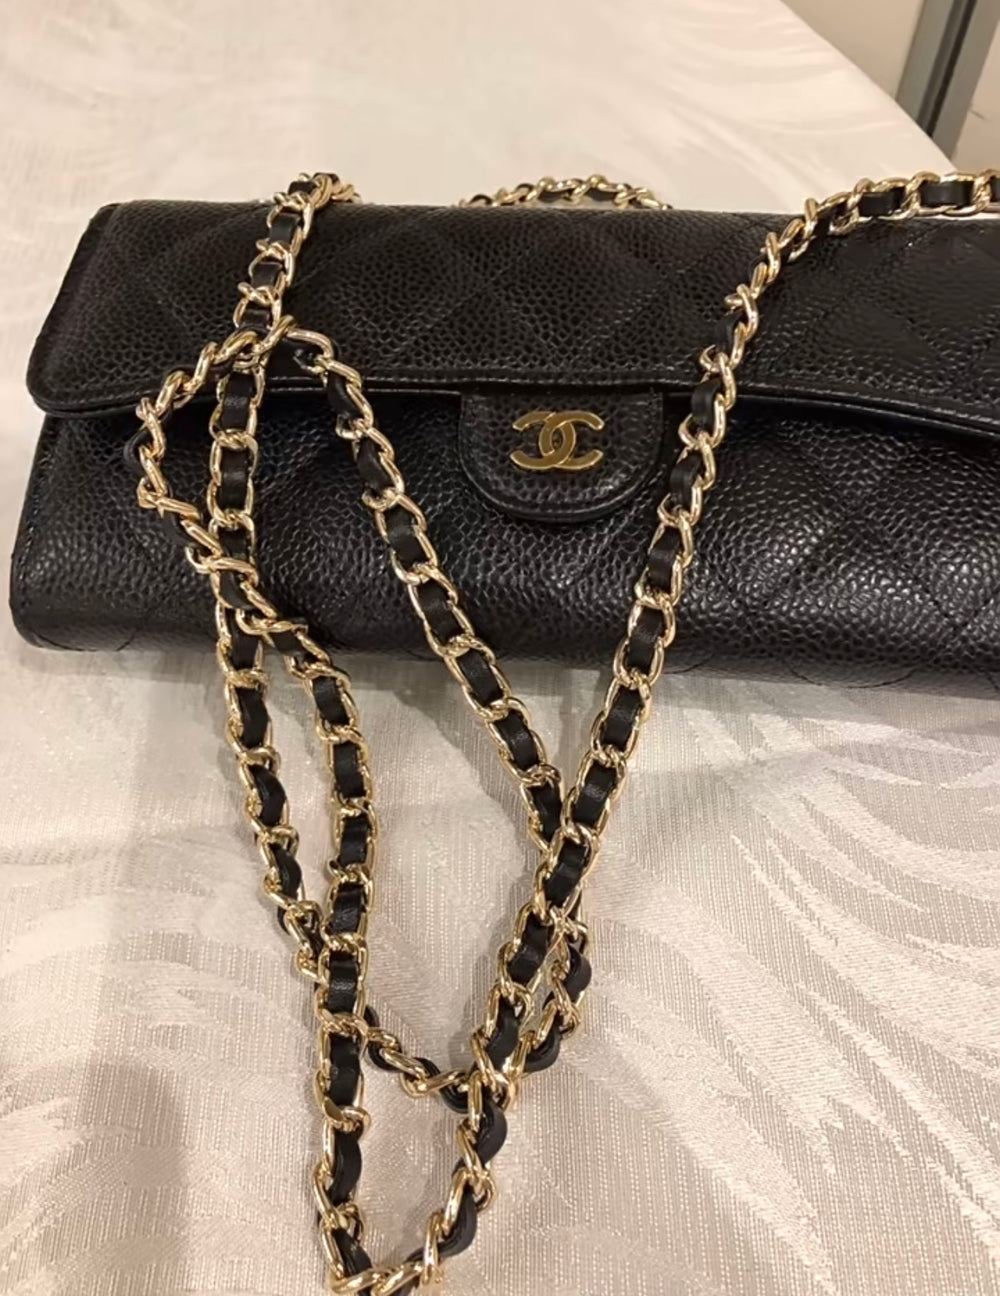 Vintage Chanel Caviar Leather Wallet - free bag strap to convert